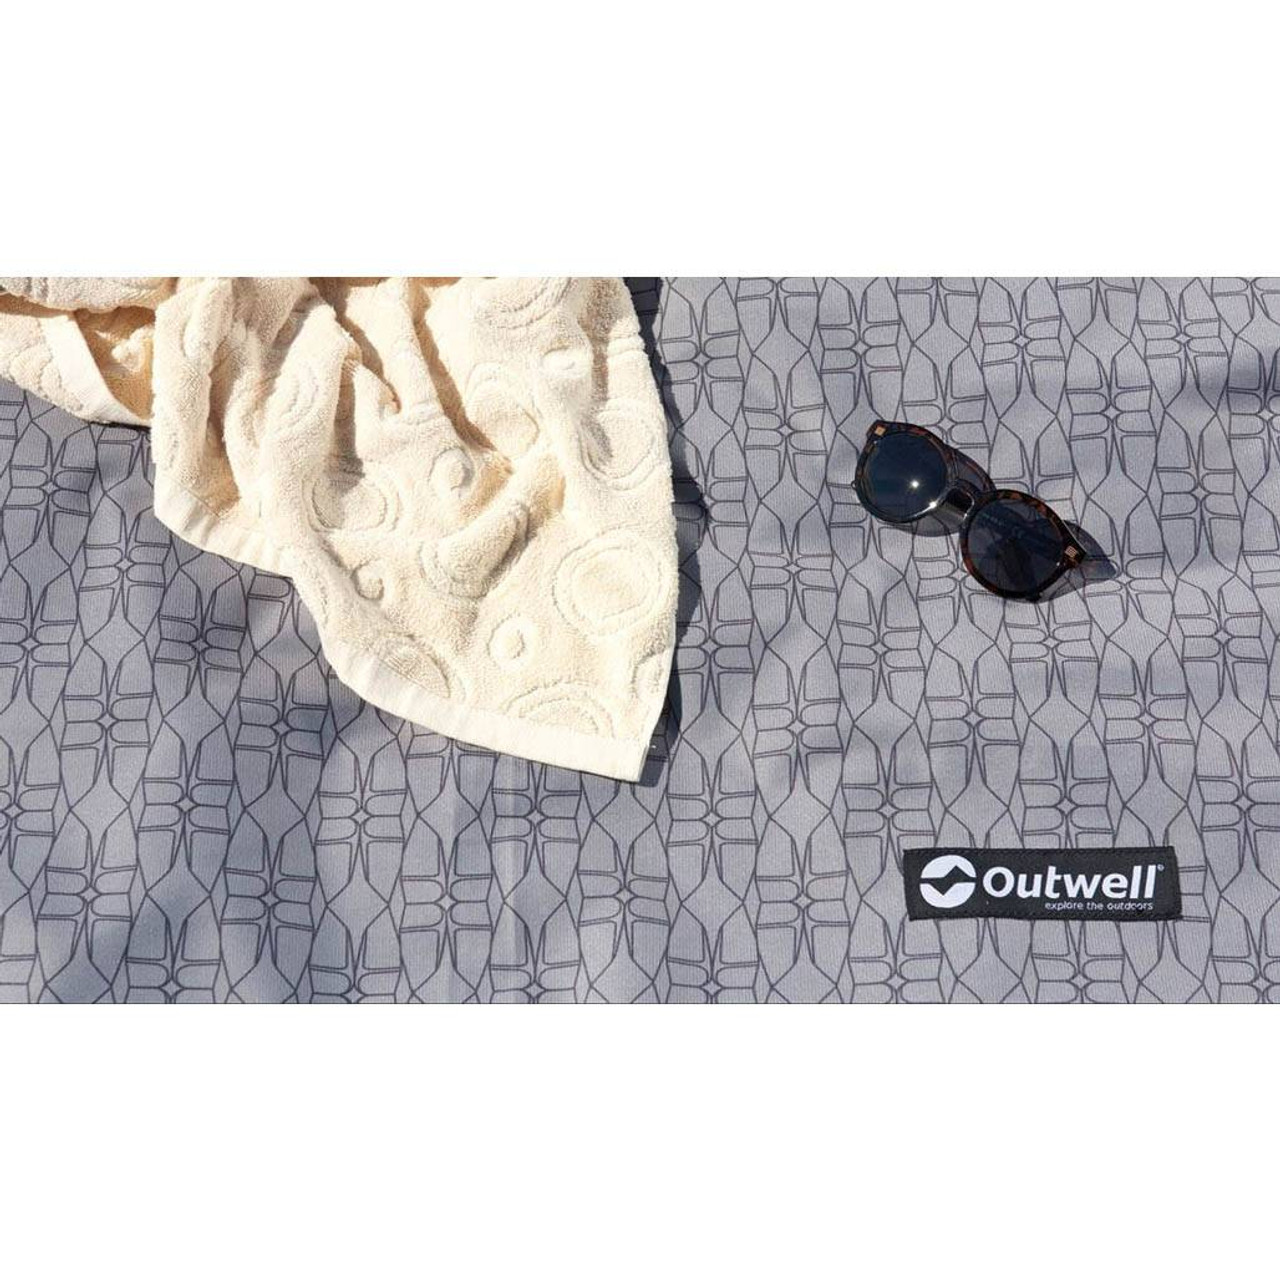 Outwell Flat Woven Carpet for Springwood 4SG Tent